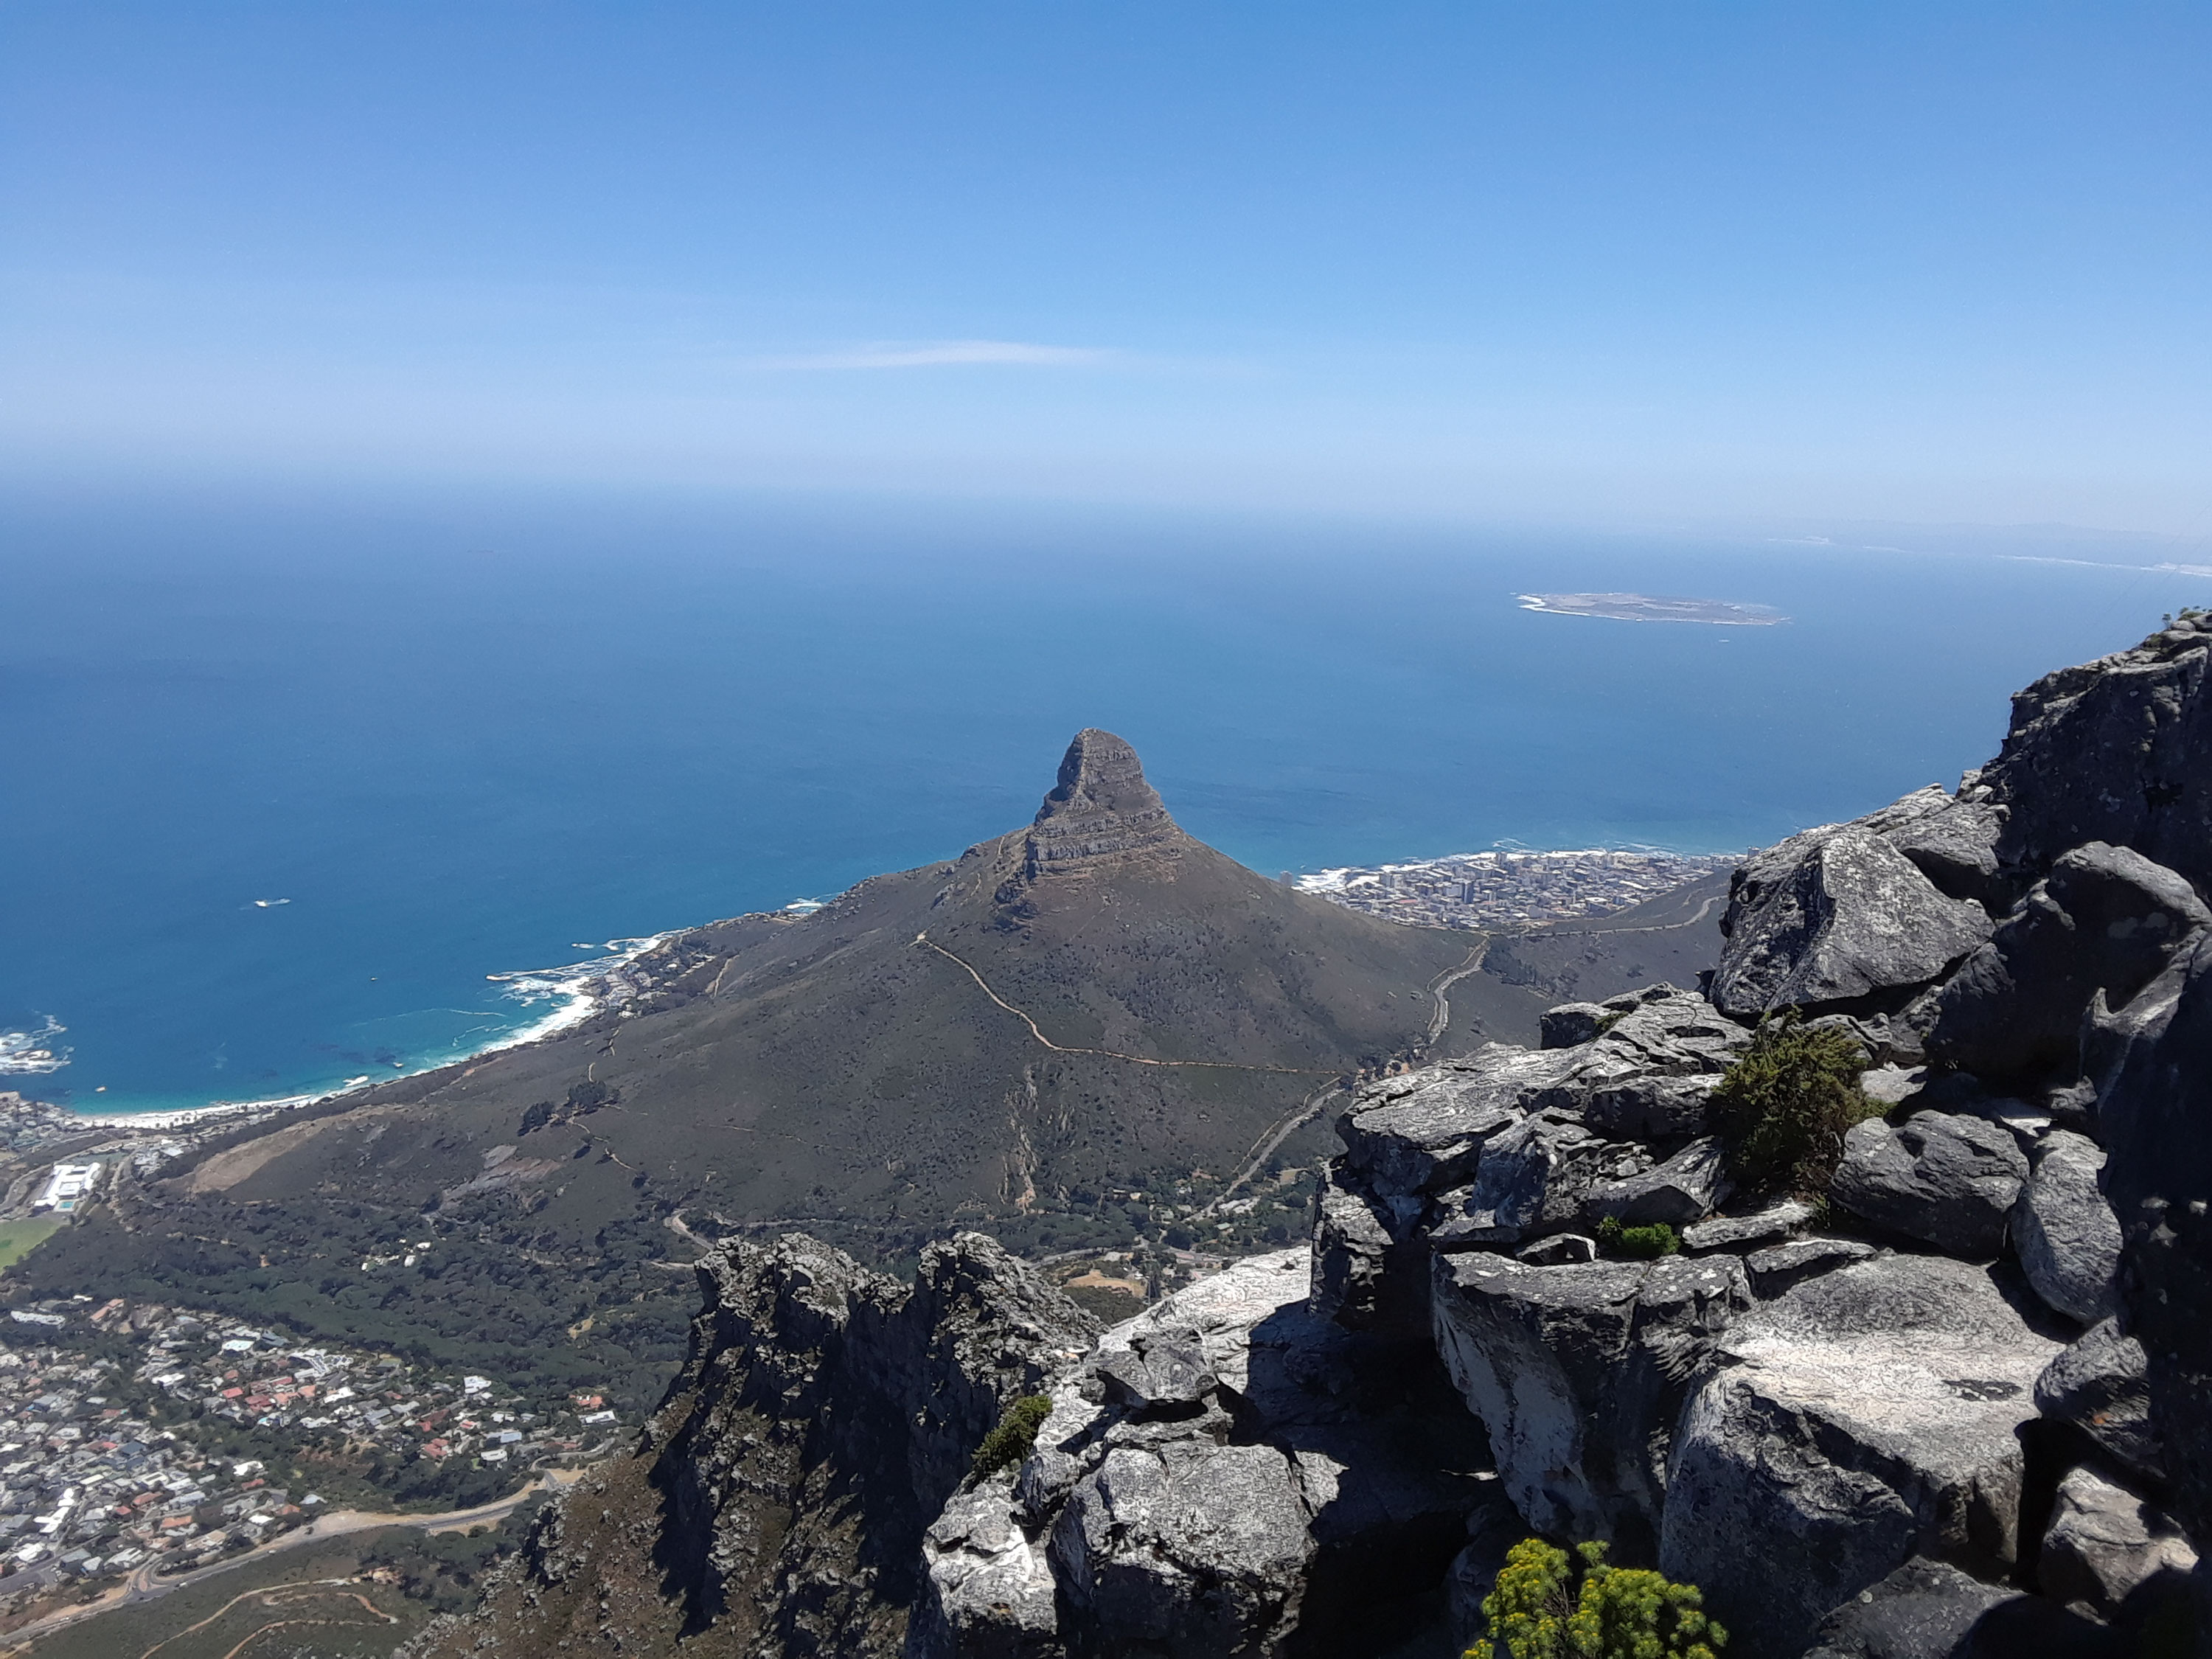 Lion's Head as seen from Table Mountain